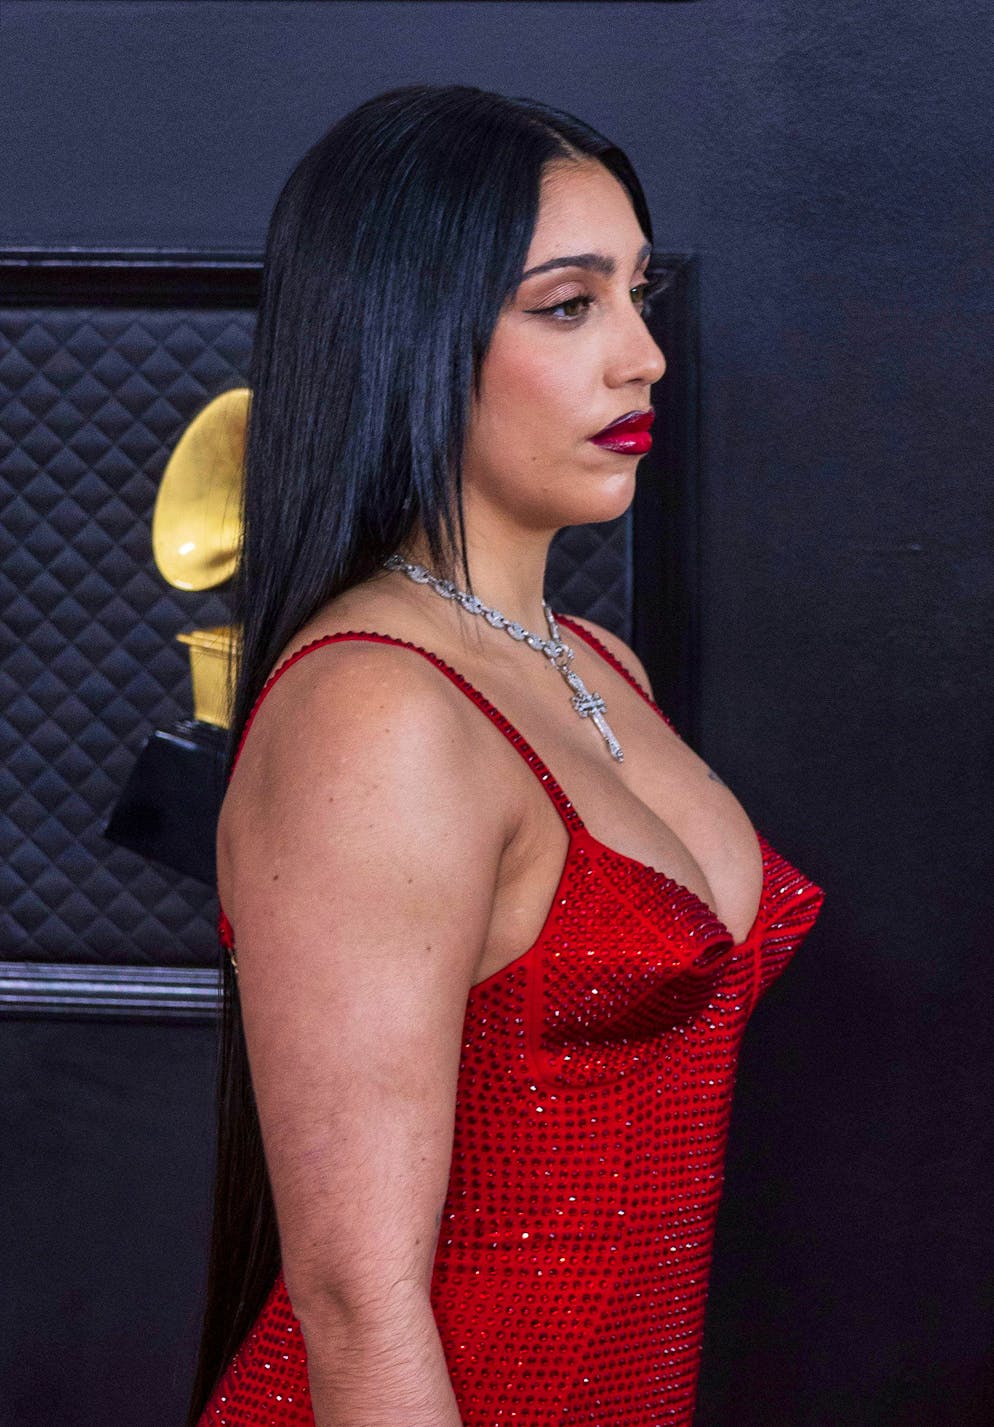 February 5, 2023, Los Angeles, California, USA: Lourdes Leon on the red carpet of the 65th Annual Grammy Awards held on Sunday February 5, 2023 at Crypto Arena in Los Angeles, California. /PI Los Angeles USA - ZUMAp124 20230205_zaa_p124_086 Copyright: xJAVIERxROJASx